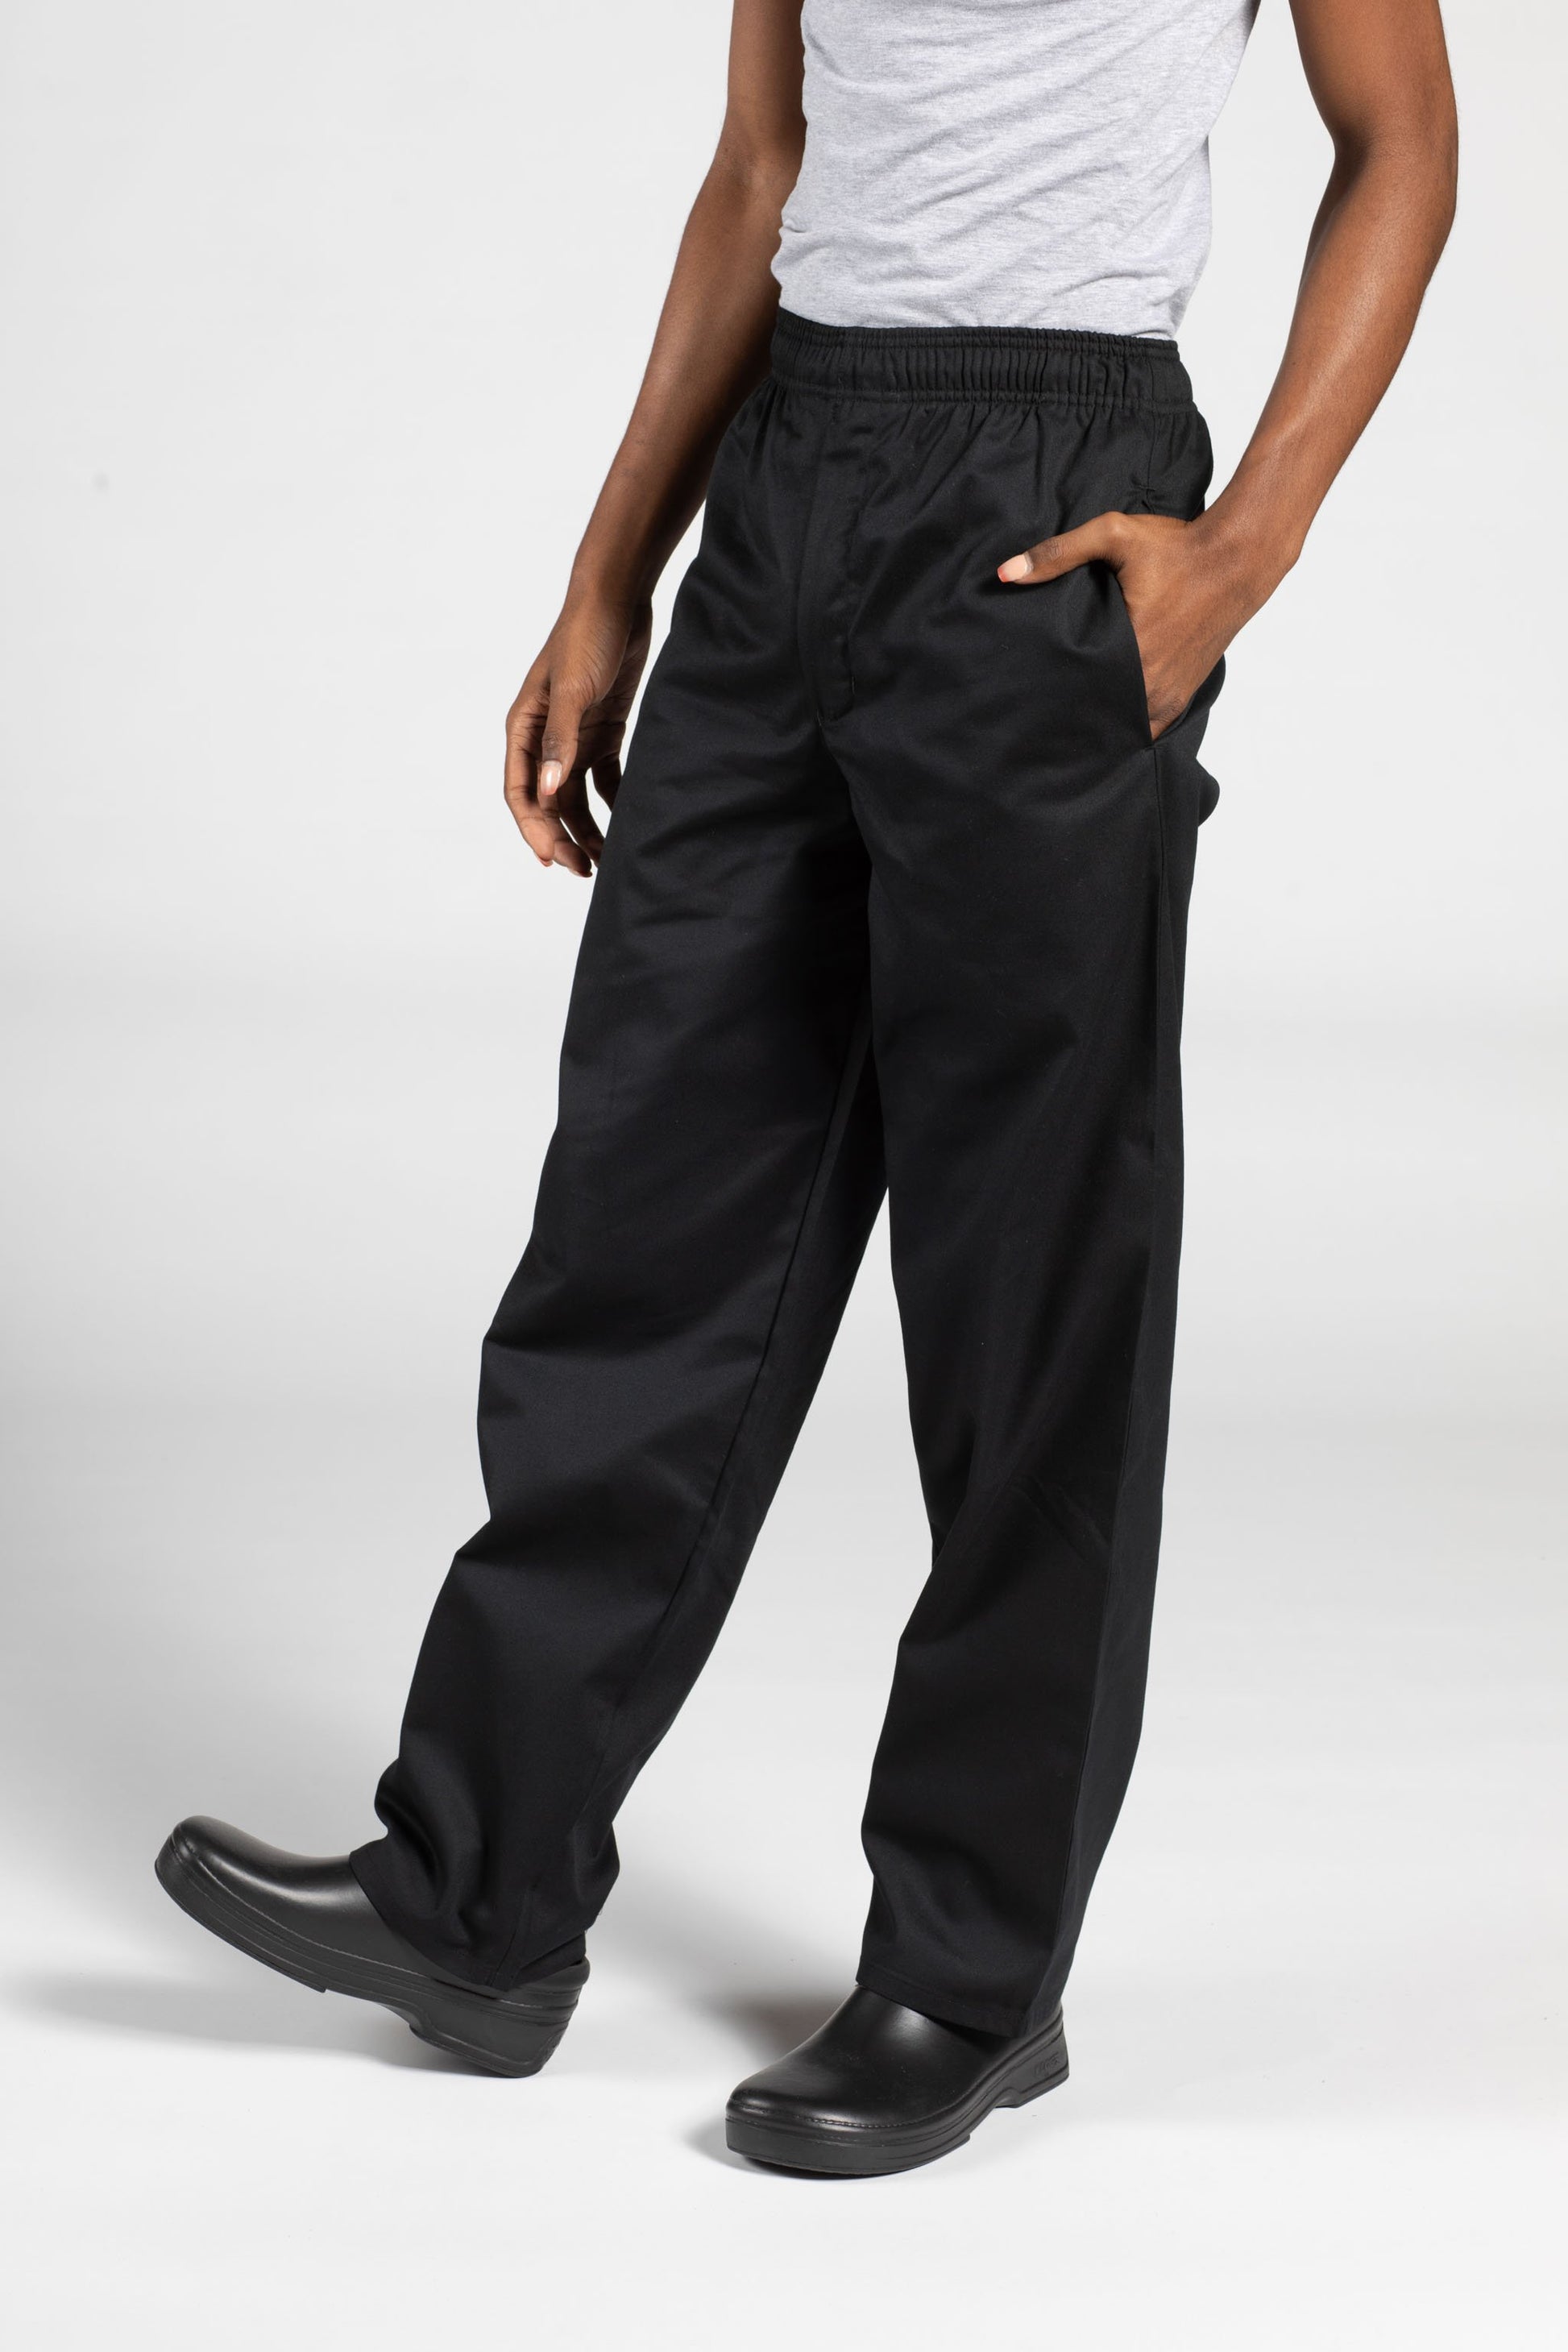 Clearance Deal on Chef Pants - ChefsCloset